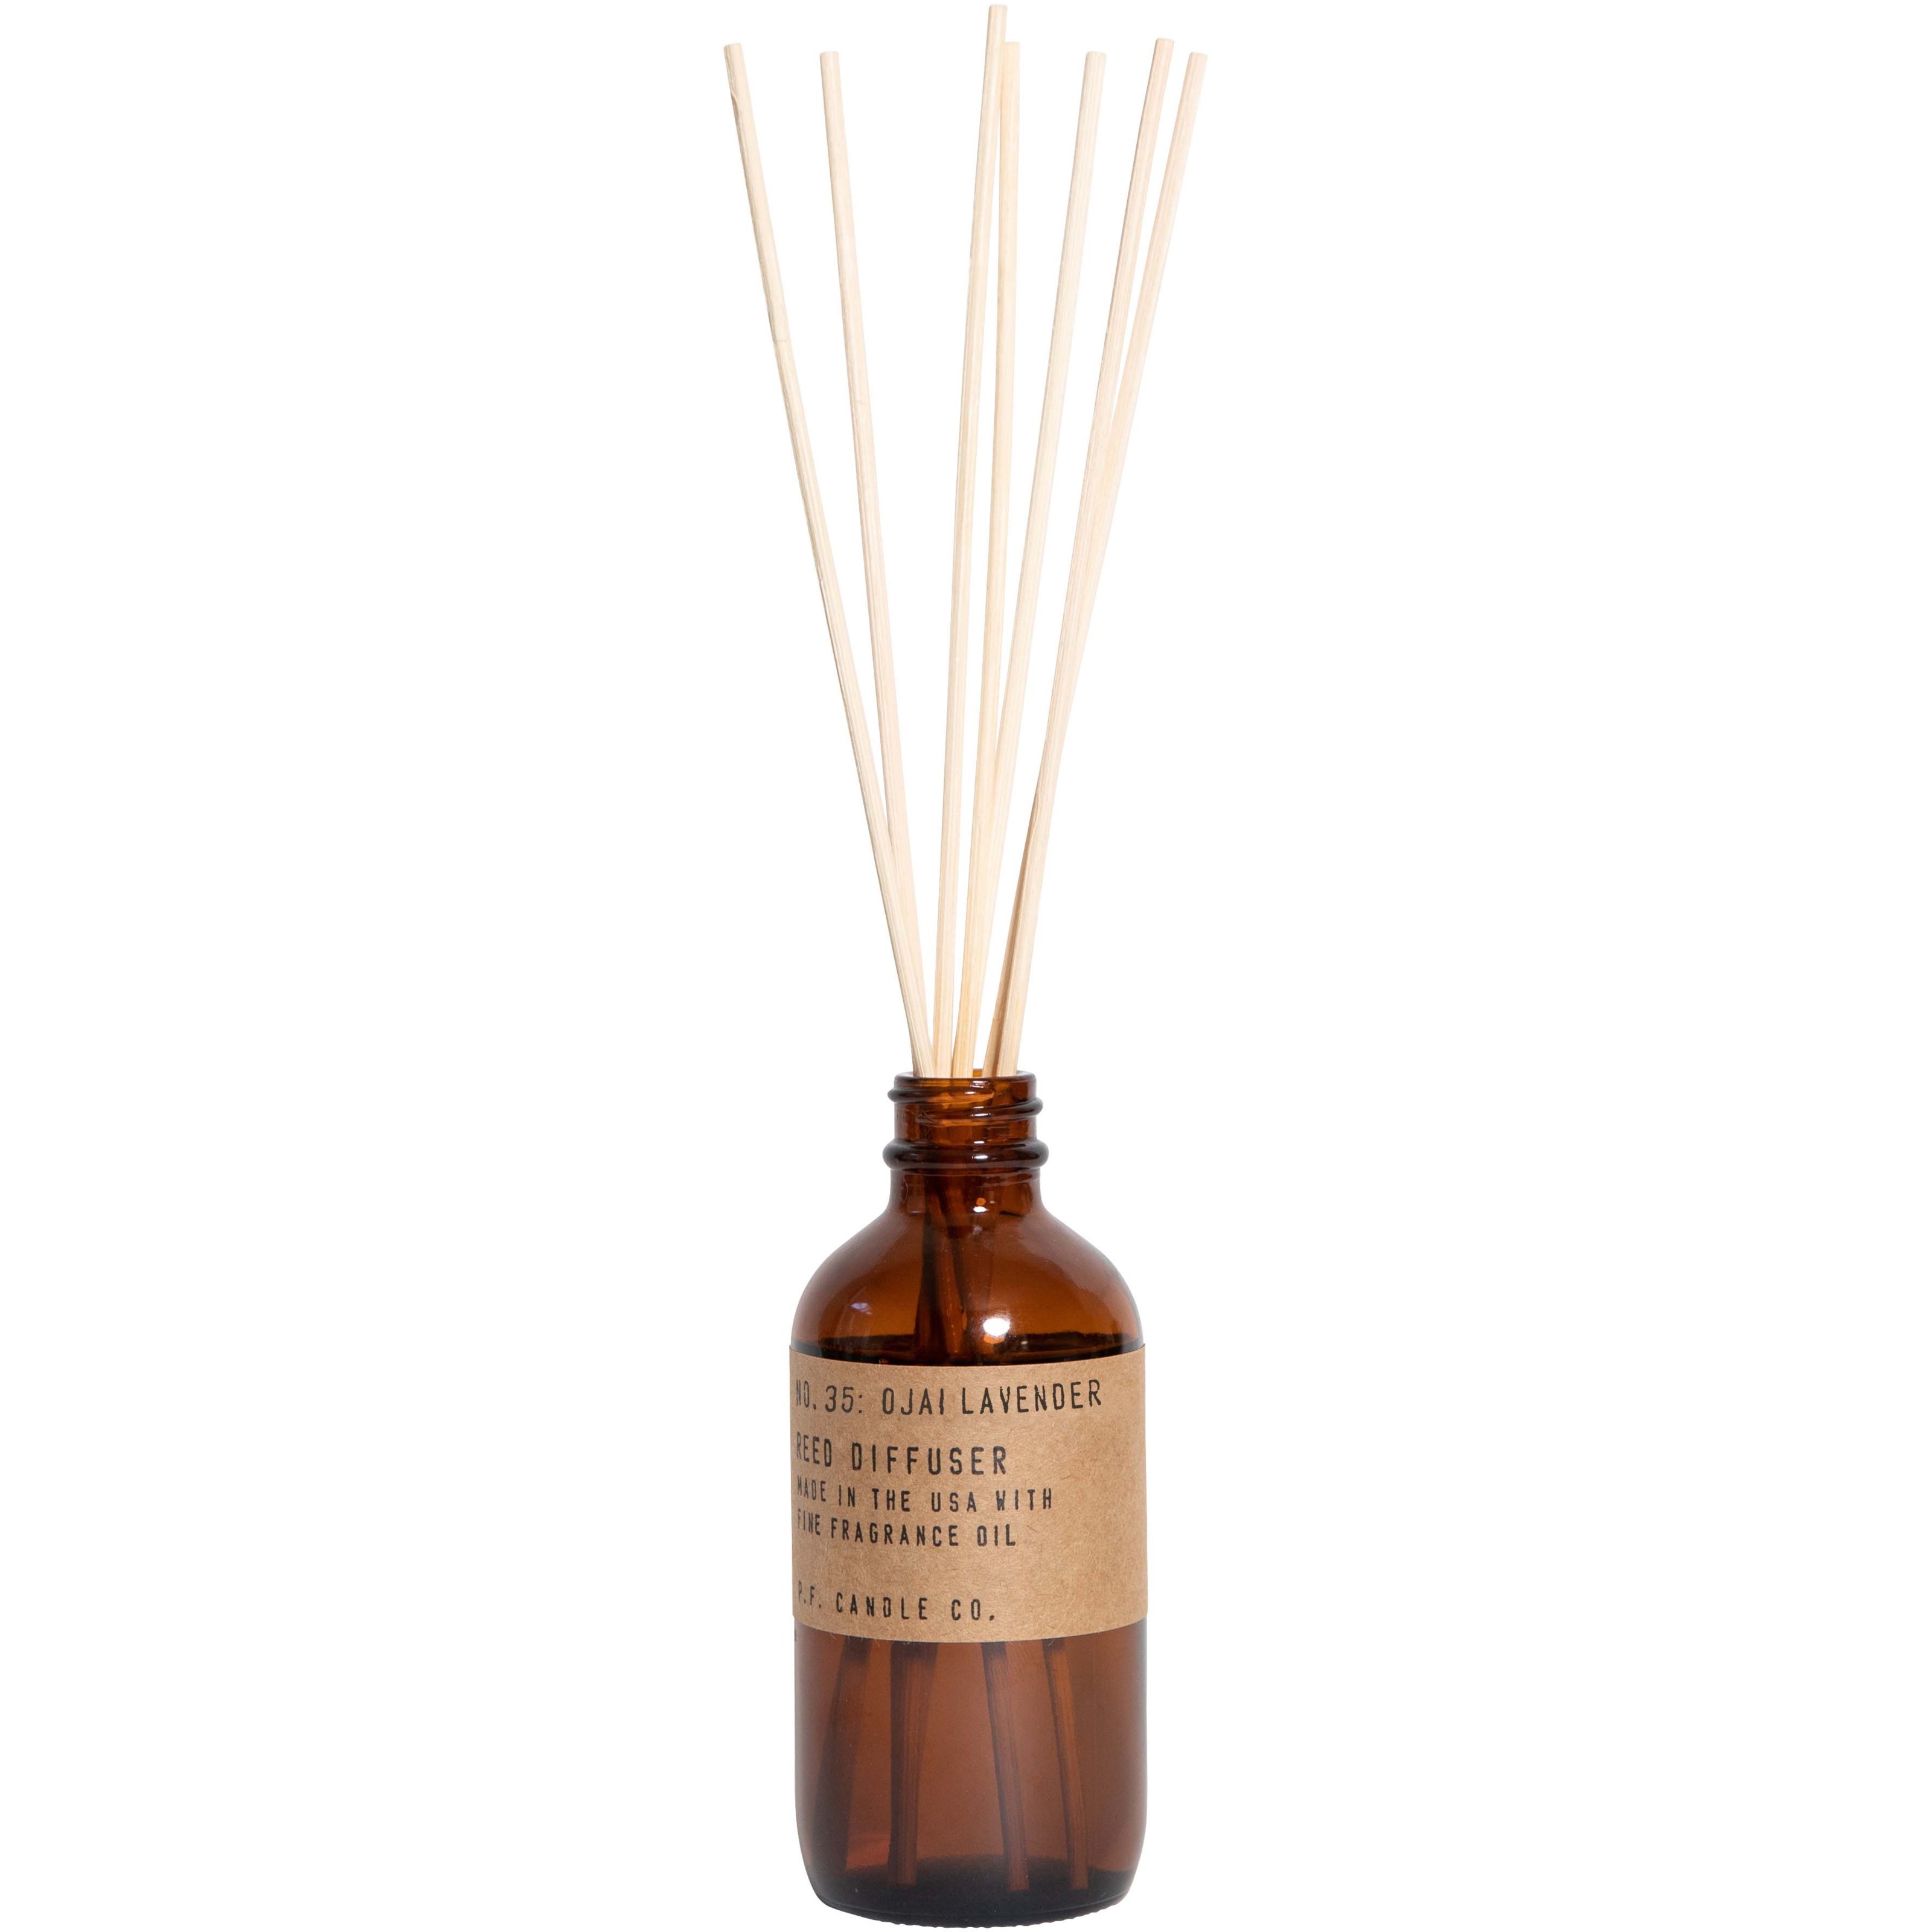 P.F. Candle Co. Ojai Lavender reed diffuser 103 ml